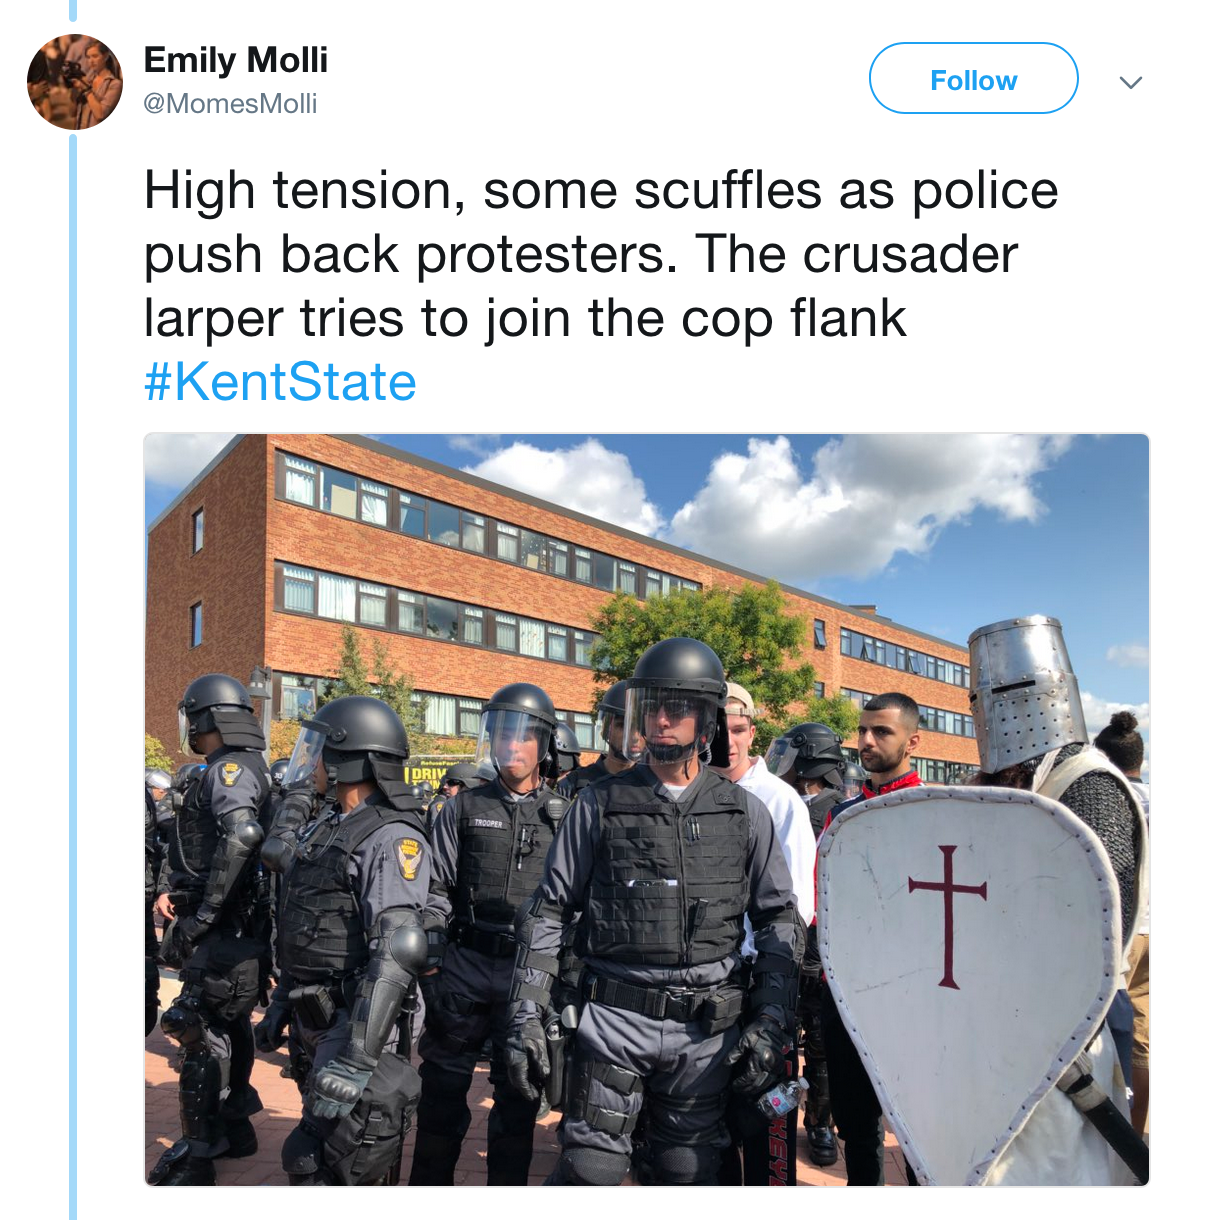 kent state gun rally - Emily Molli MomesMolli High tension, some scuffles as police push back protesters. The crusader larper tries to join the cop flank State